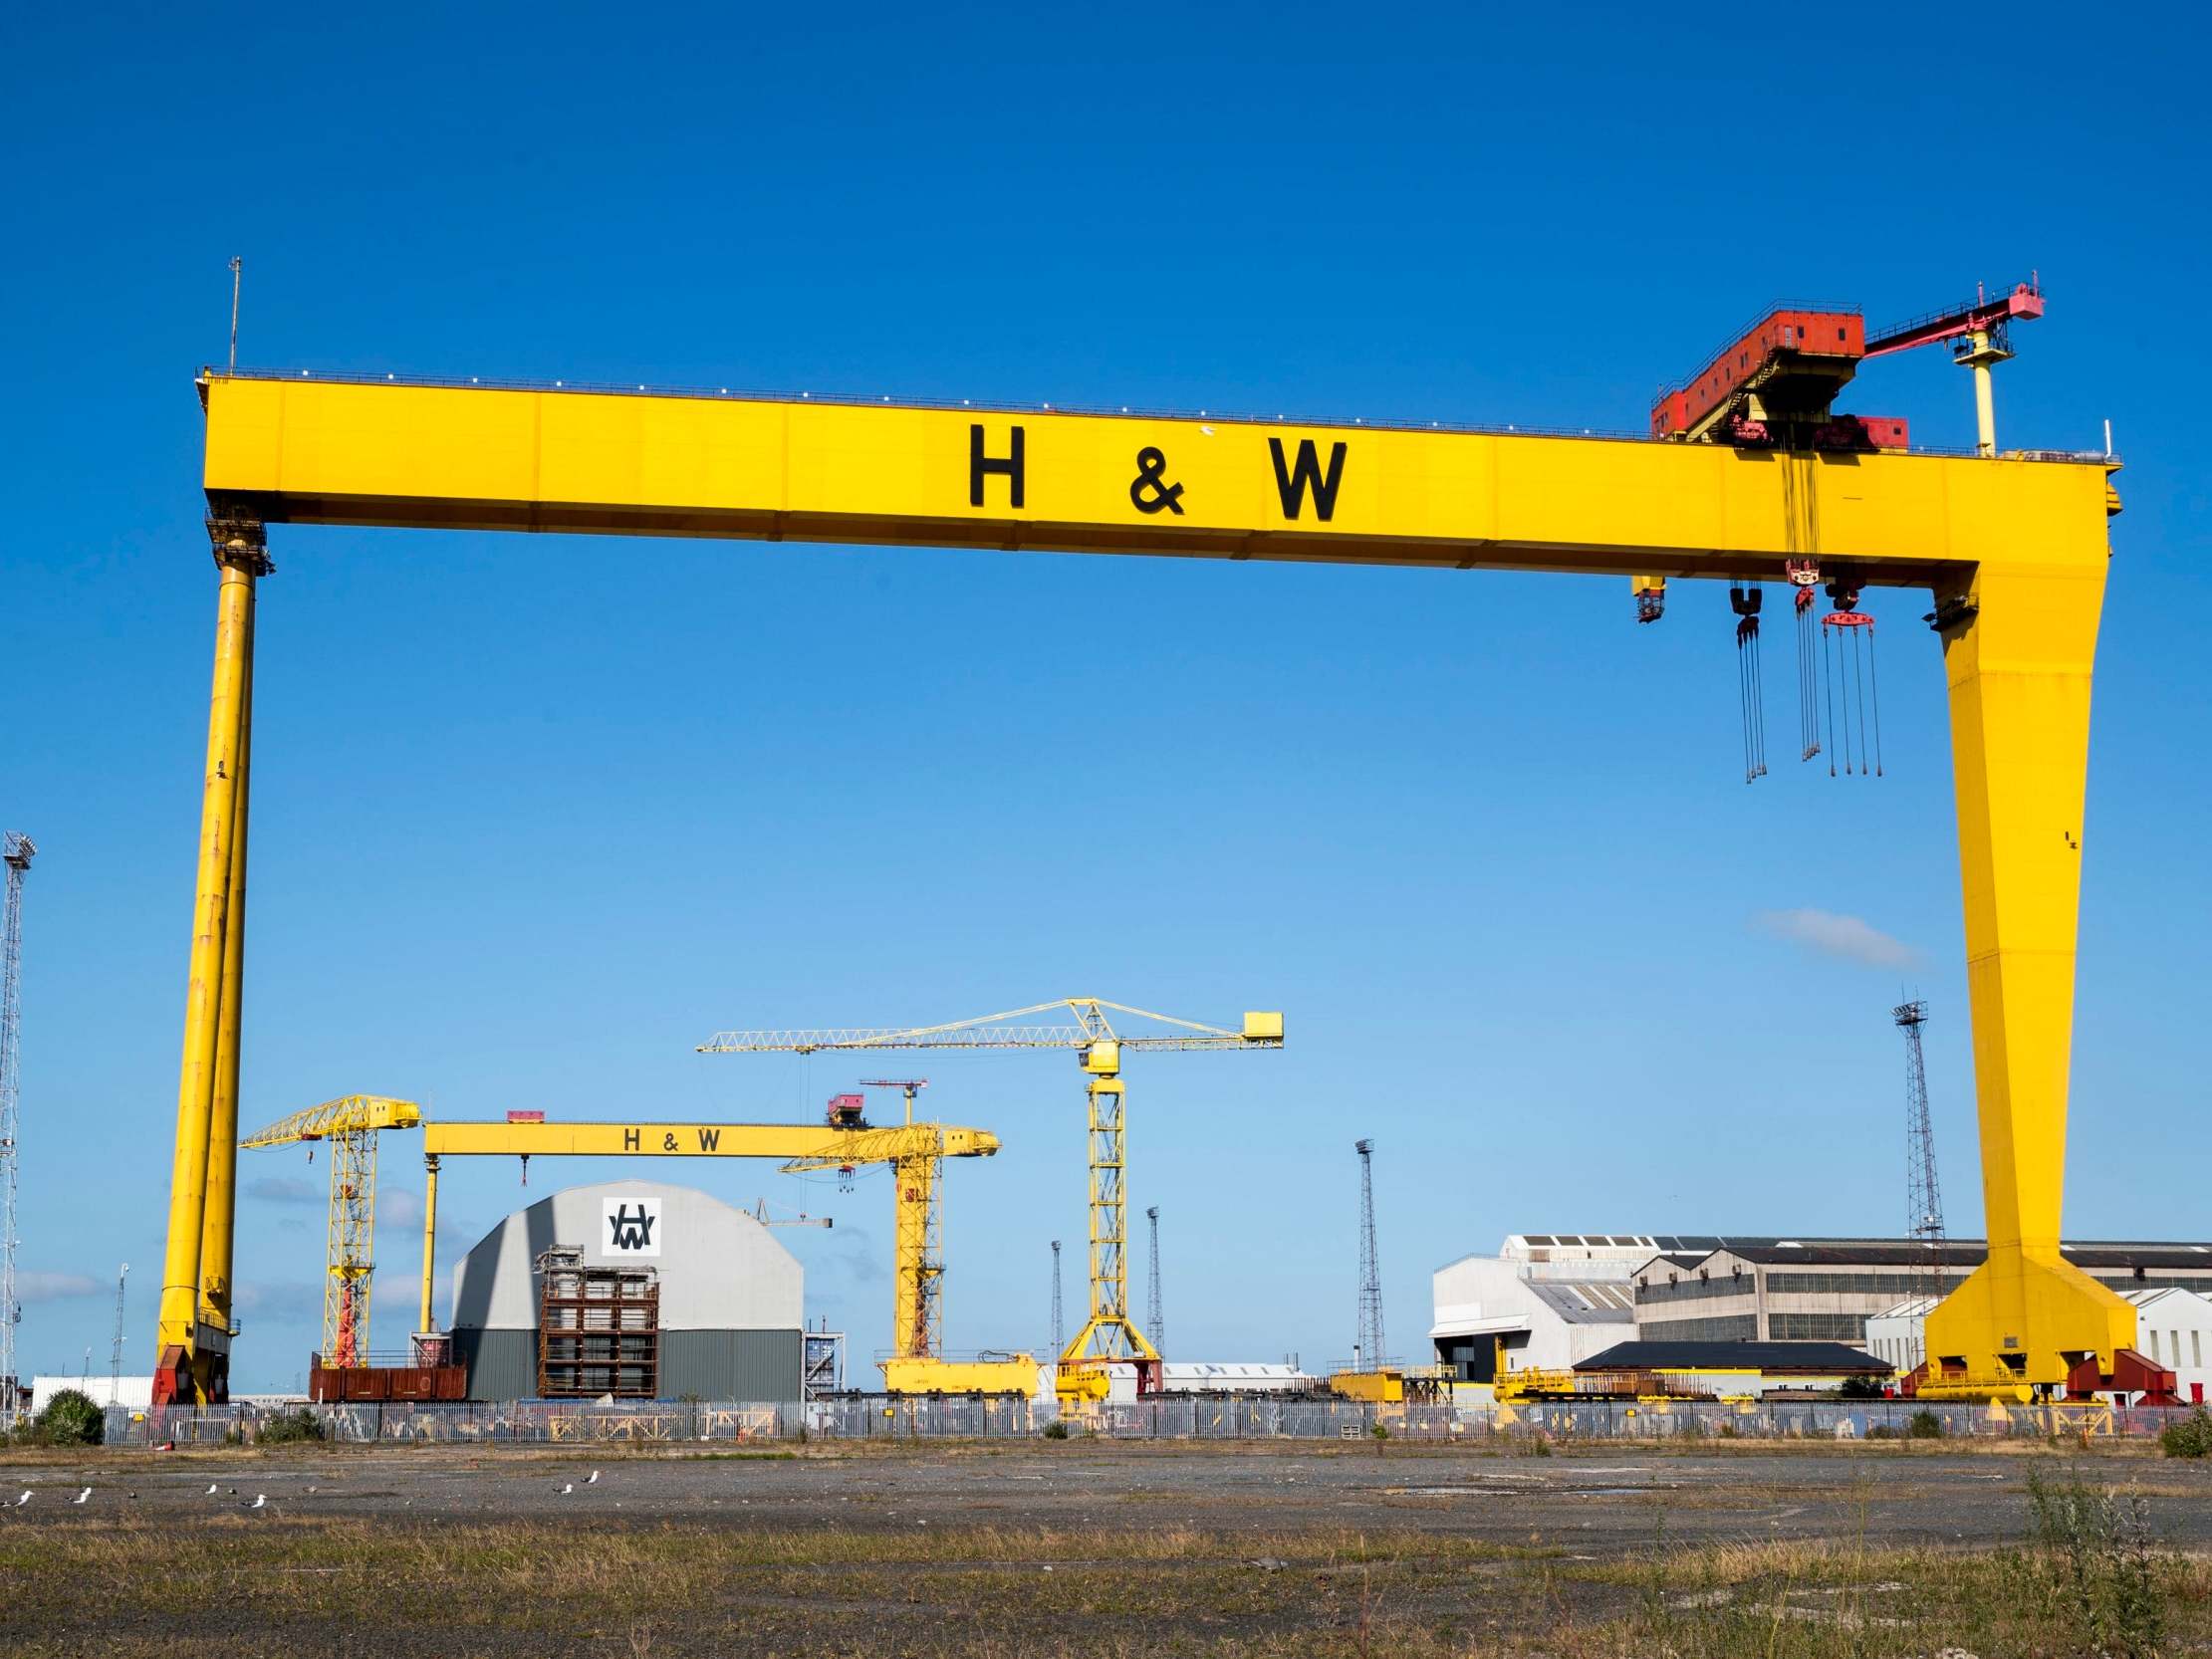 The shipyard's yellow cranes have been a staple feature of Belfast's skyline for a generation